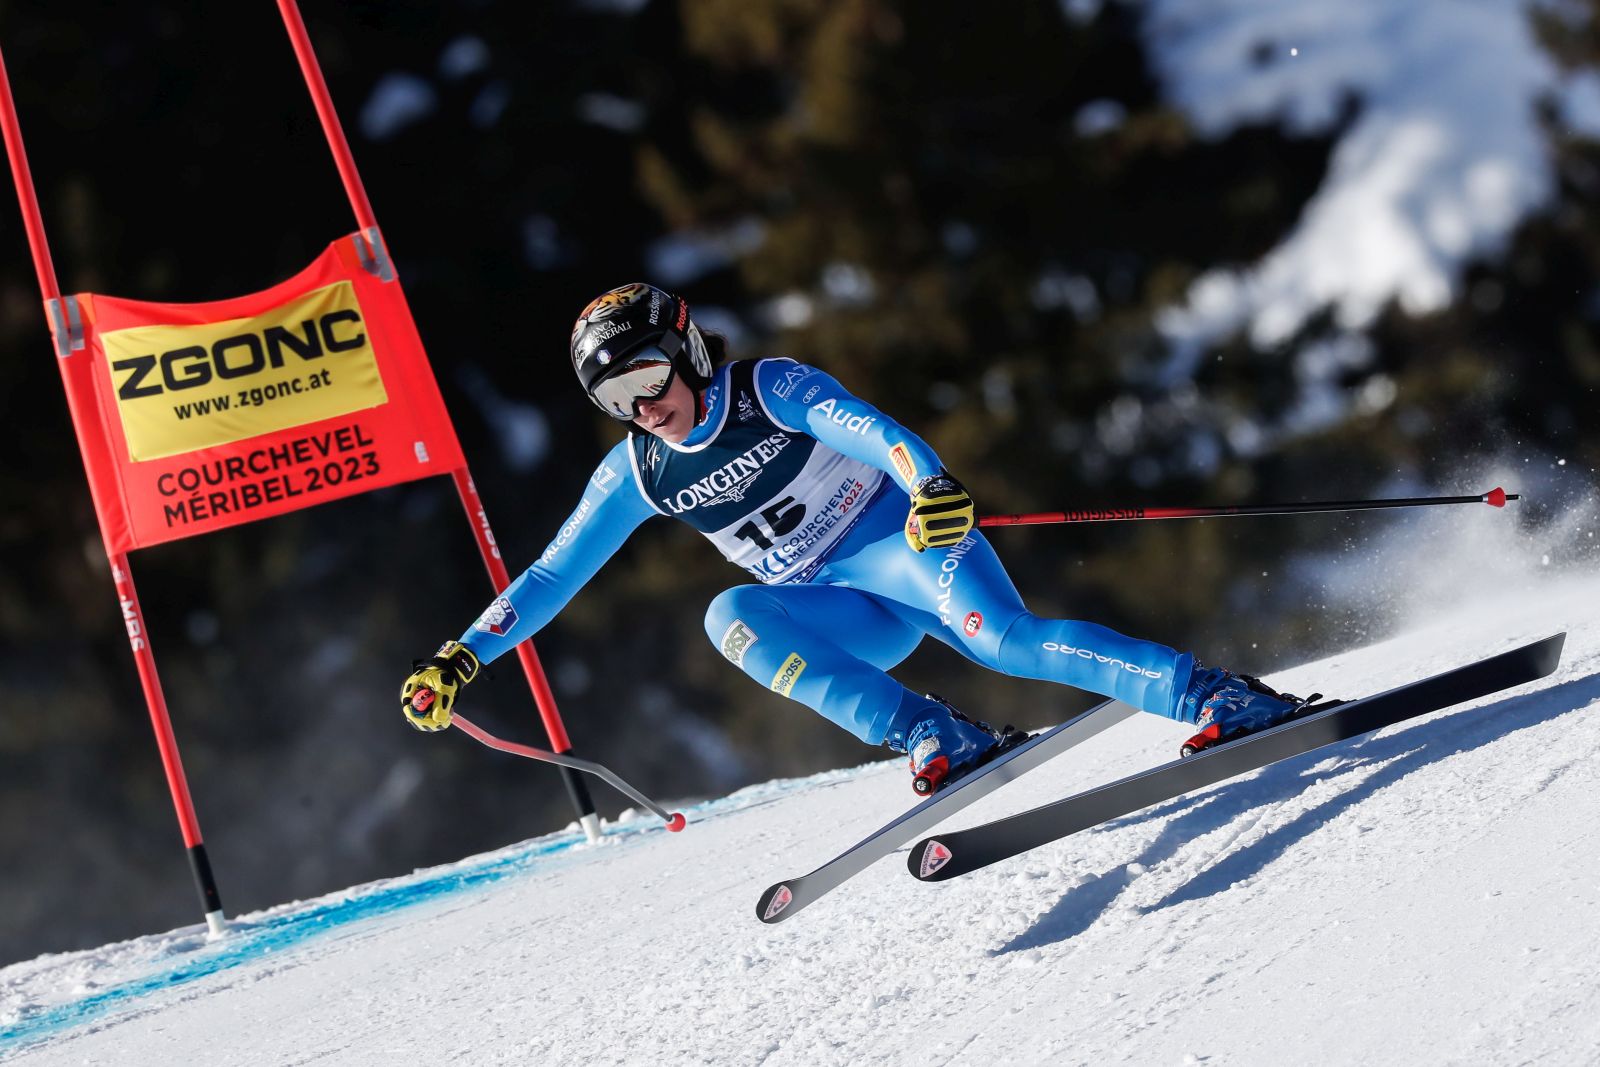 epa10450556 Federica Brignone of Italy in action during the Super G portion of the Women's Alpine Combined event at the FIS Alpine Skiing World Championships in Meribel, France, 06 February 2023.  EPA/GUILLAUME HORCAJUELO